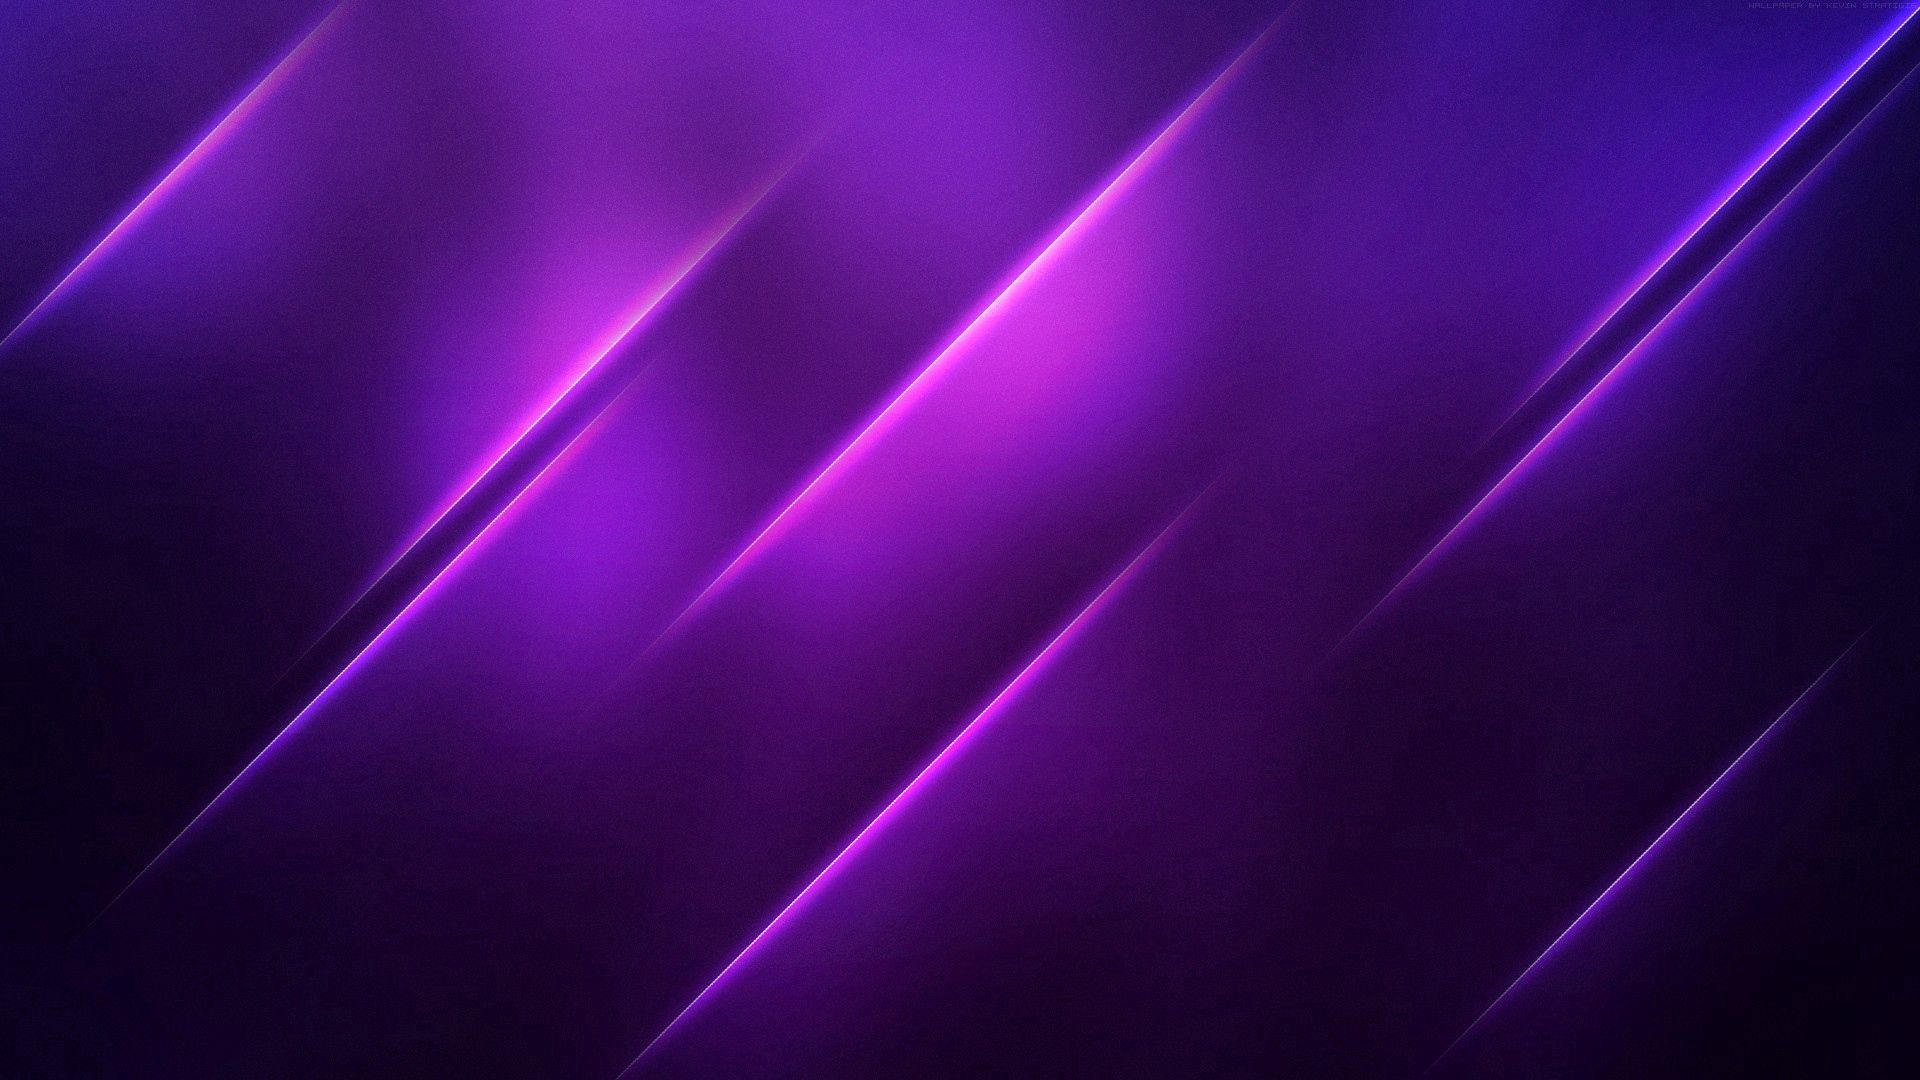 violet, obliquely, abstract, bright, lines, purple High Definition image